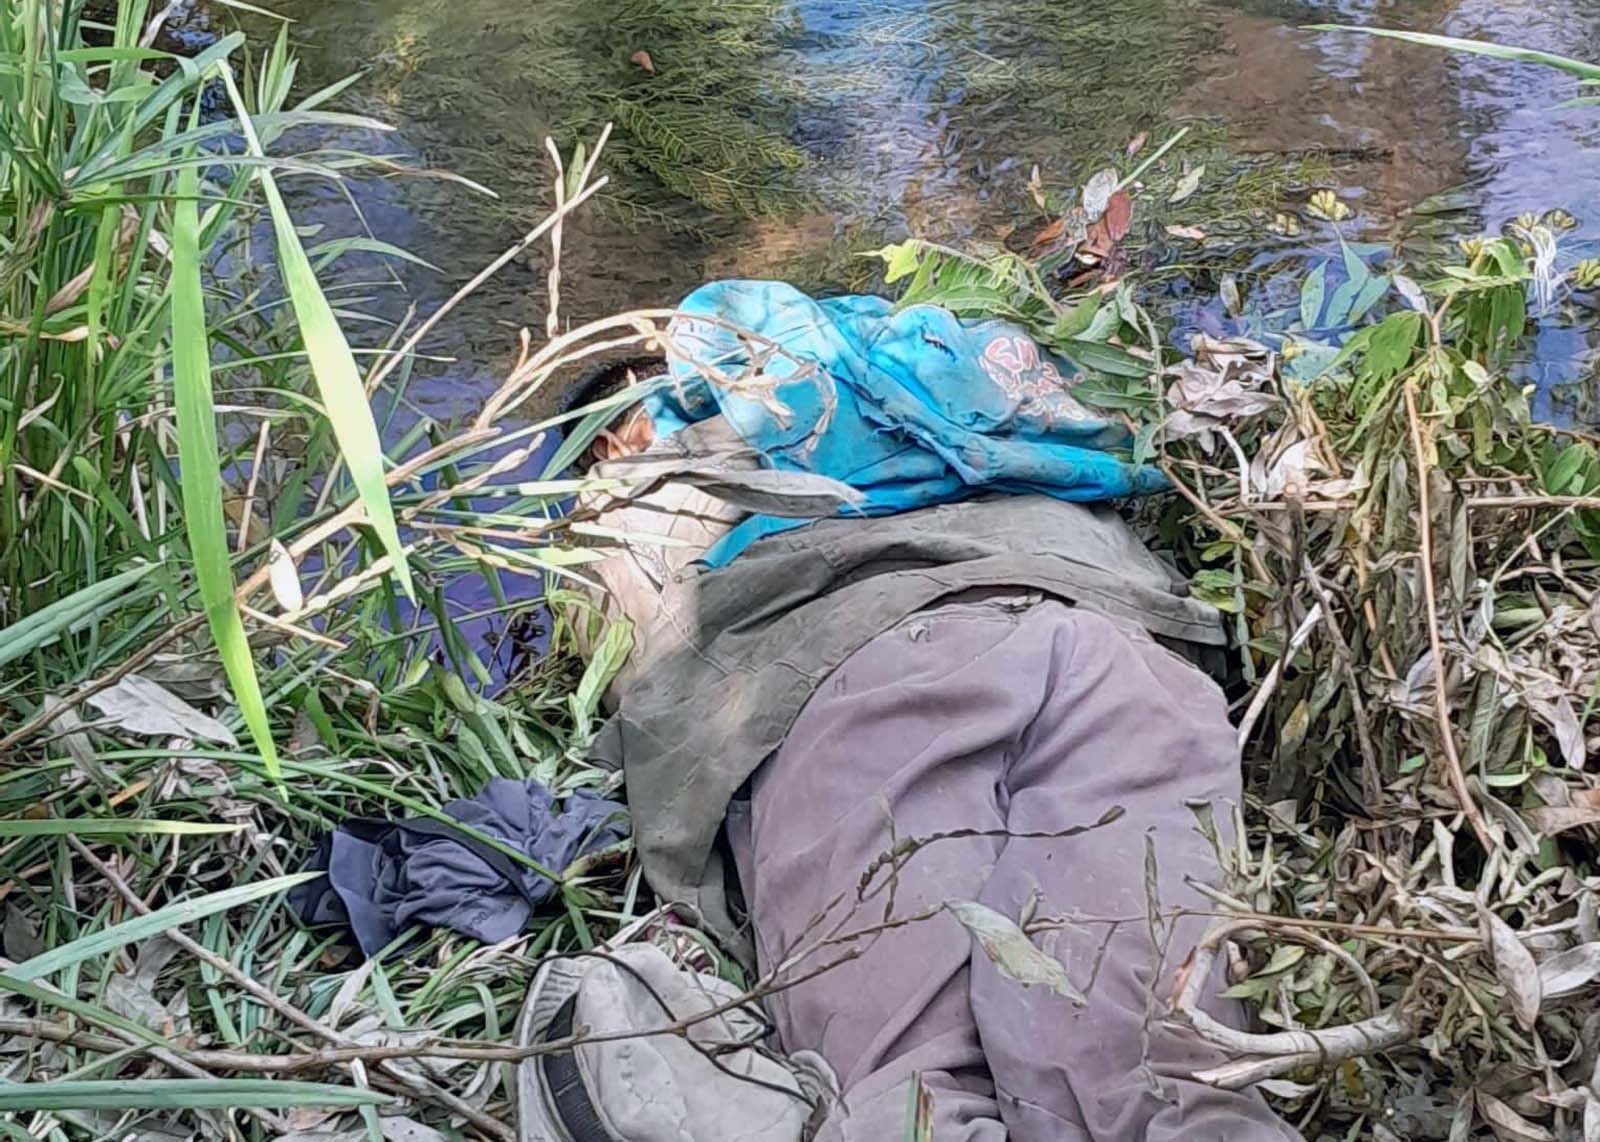 One of the Indigenous people found murdered in the river.